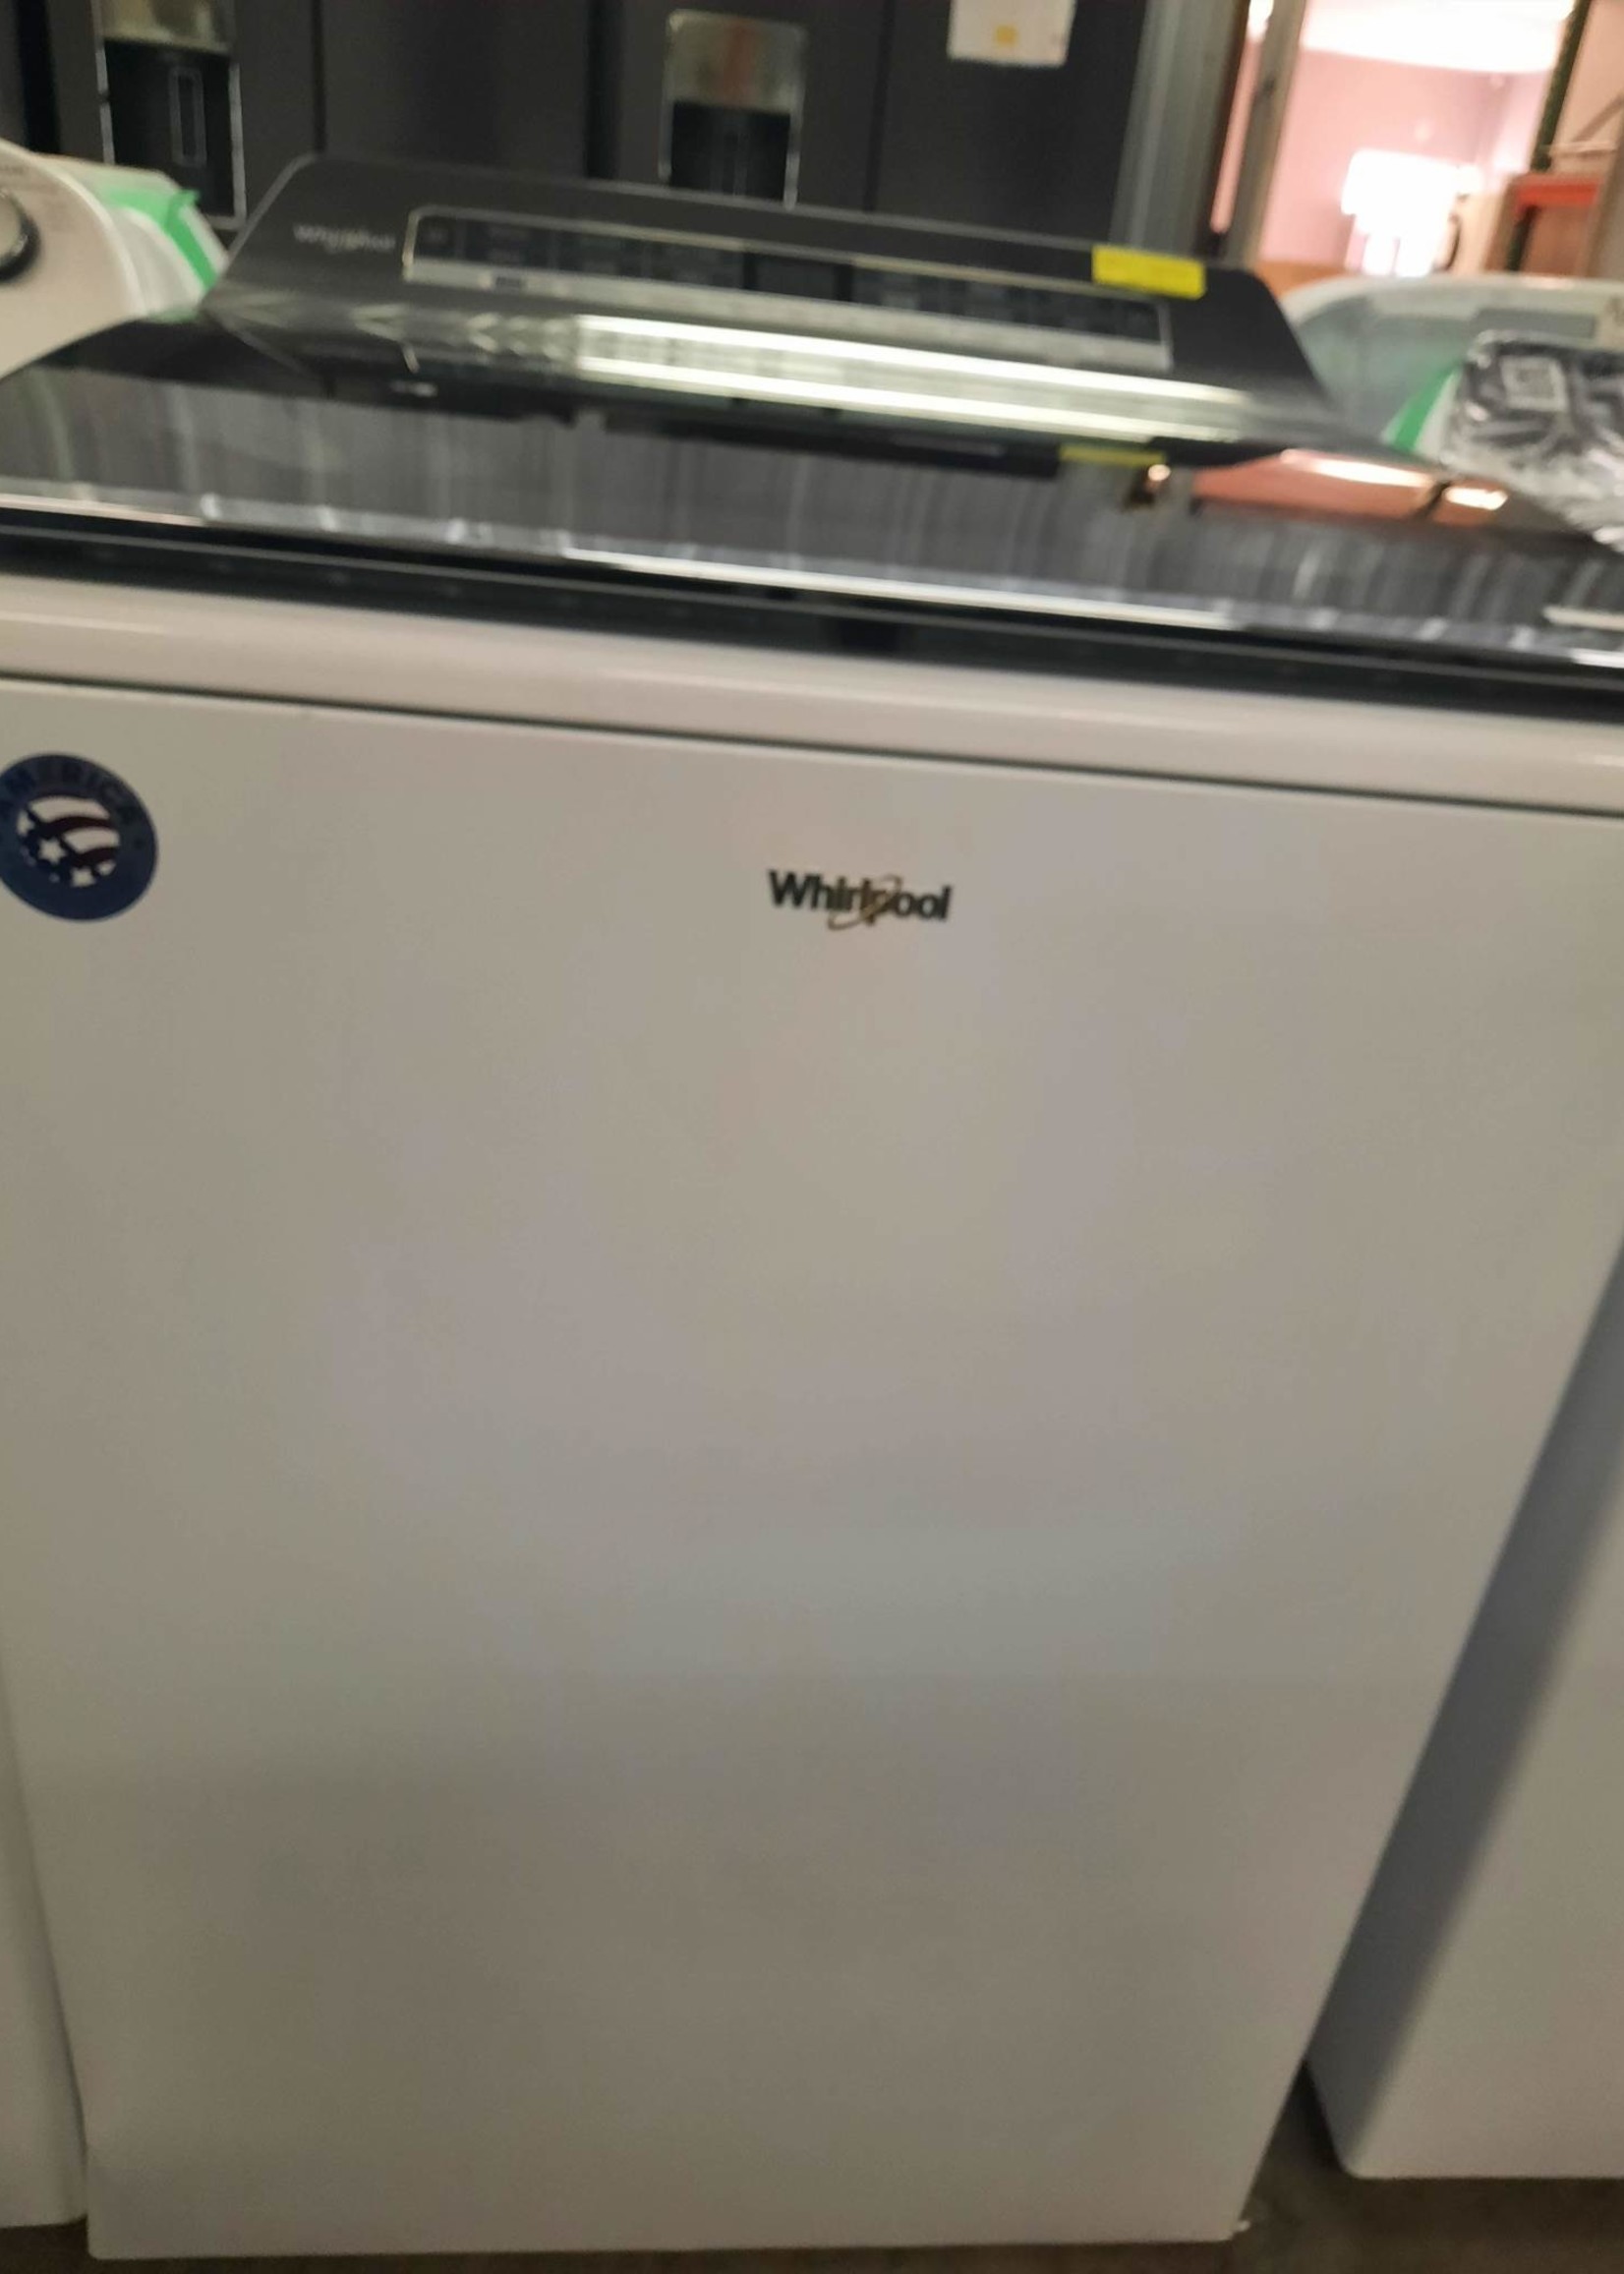 Whirlpool *Whirlpool WTW7120HW 5.3 cu. ft. Smart White Top Load Washing Machine with Load and Go, Built-In Water Faucet and Stain Brush, ENERGY STAR